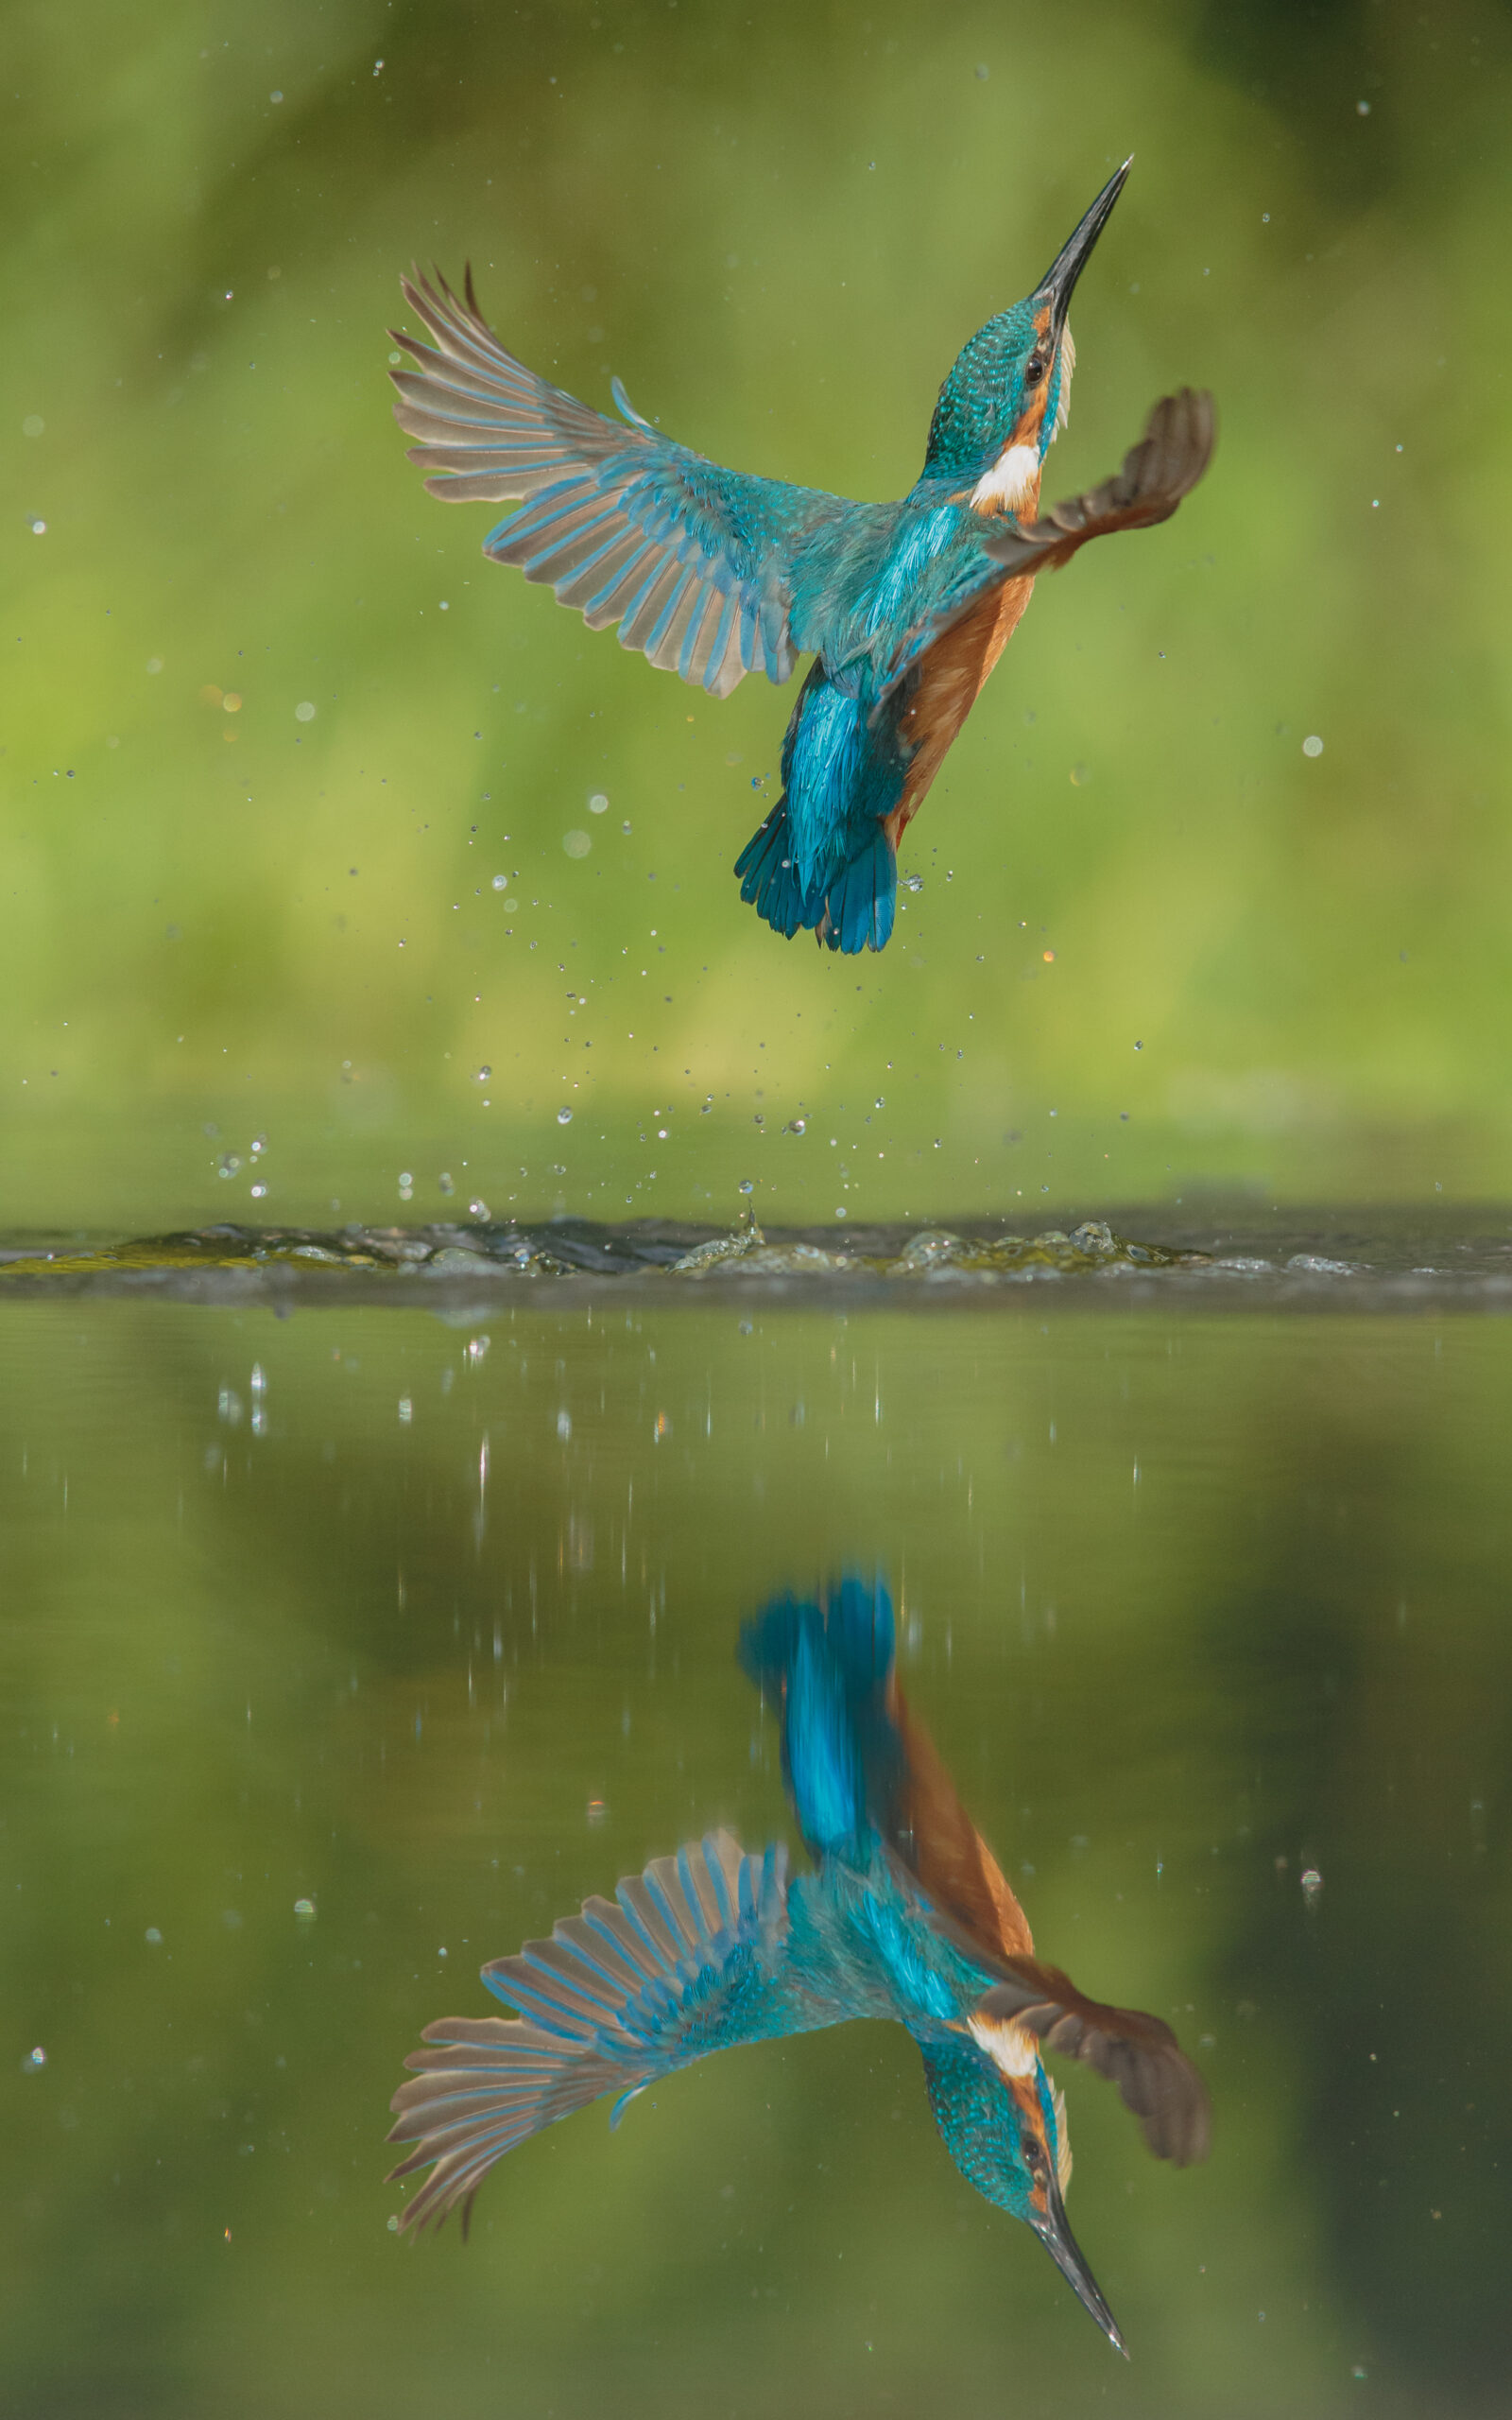  Kingfisher Bird emerging from pond